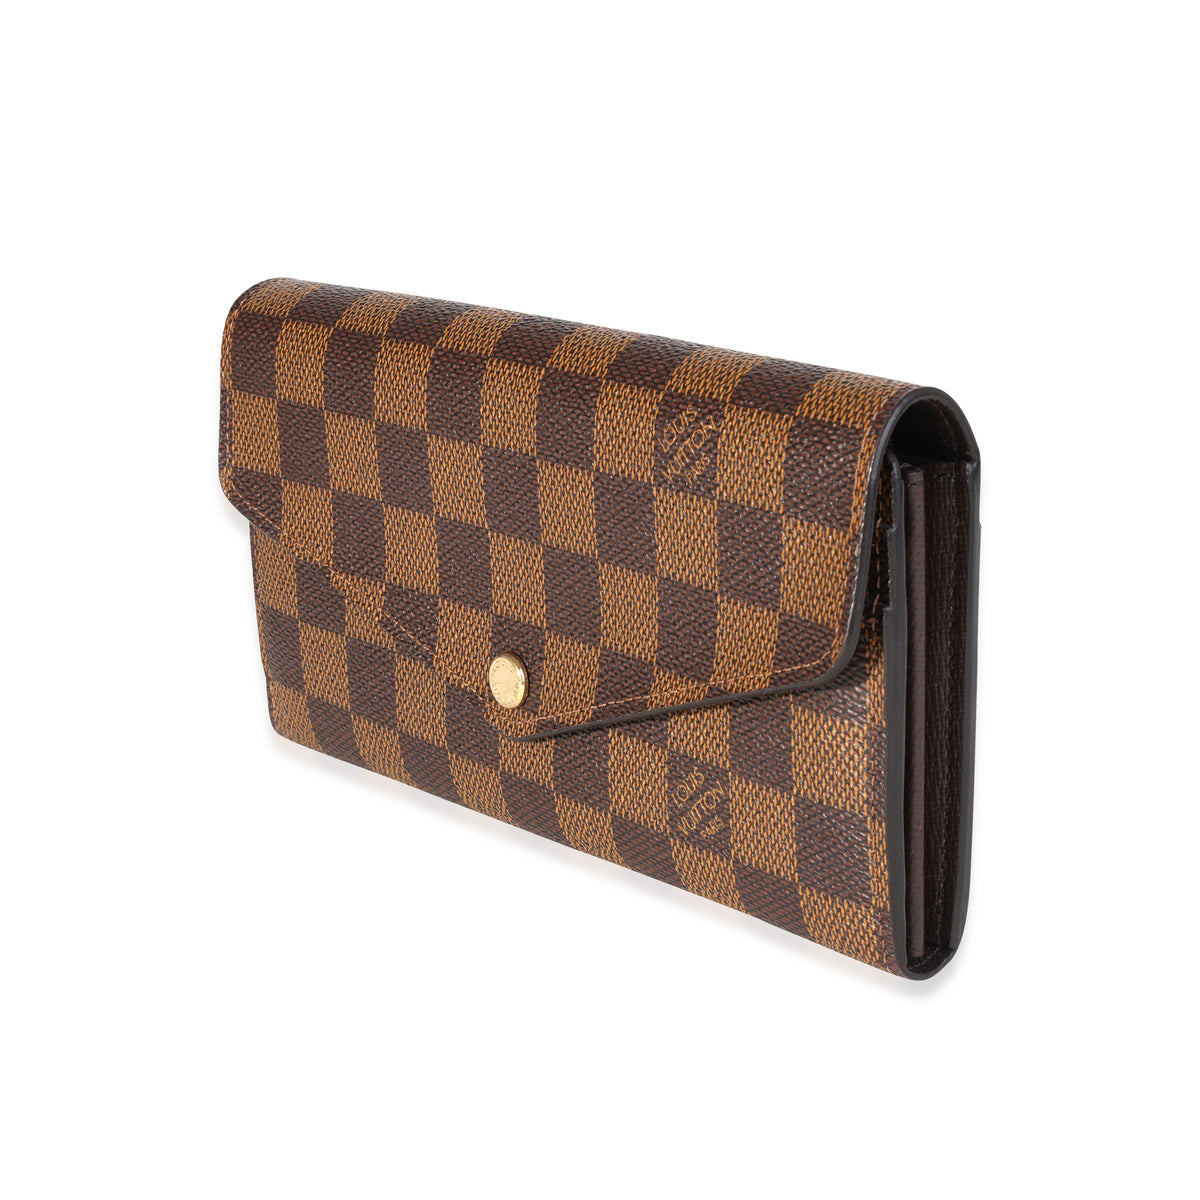 Sarah Wallet Damier Ebene Canvas - Wallets and Small Leather Goods